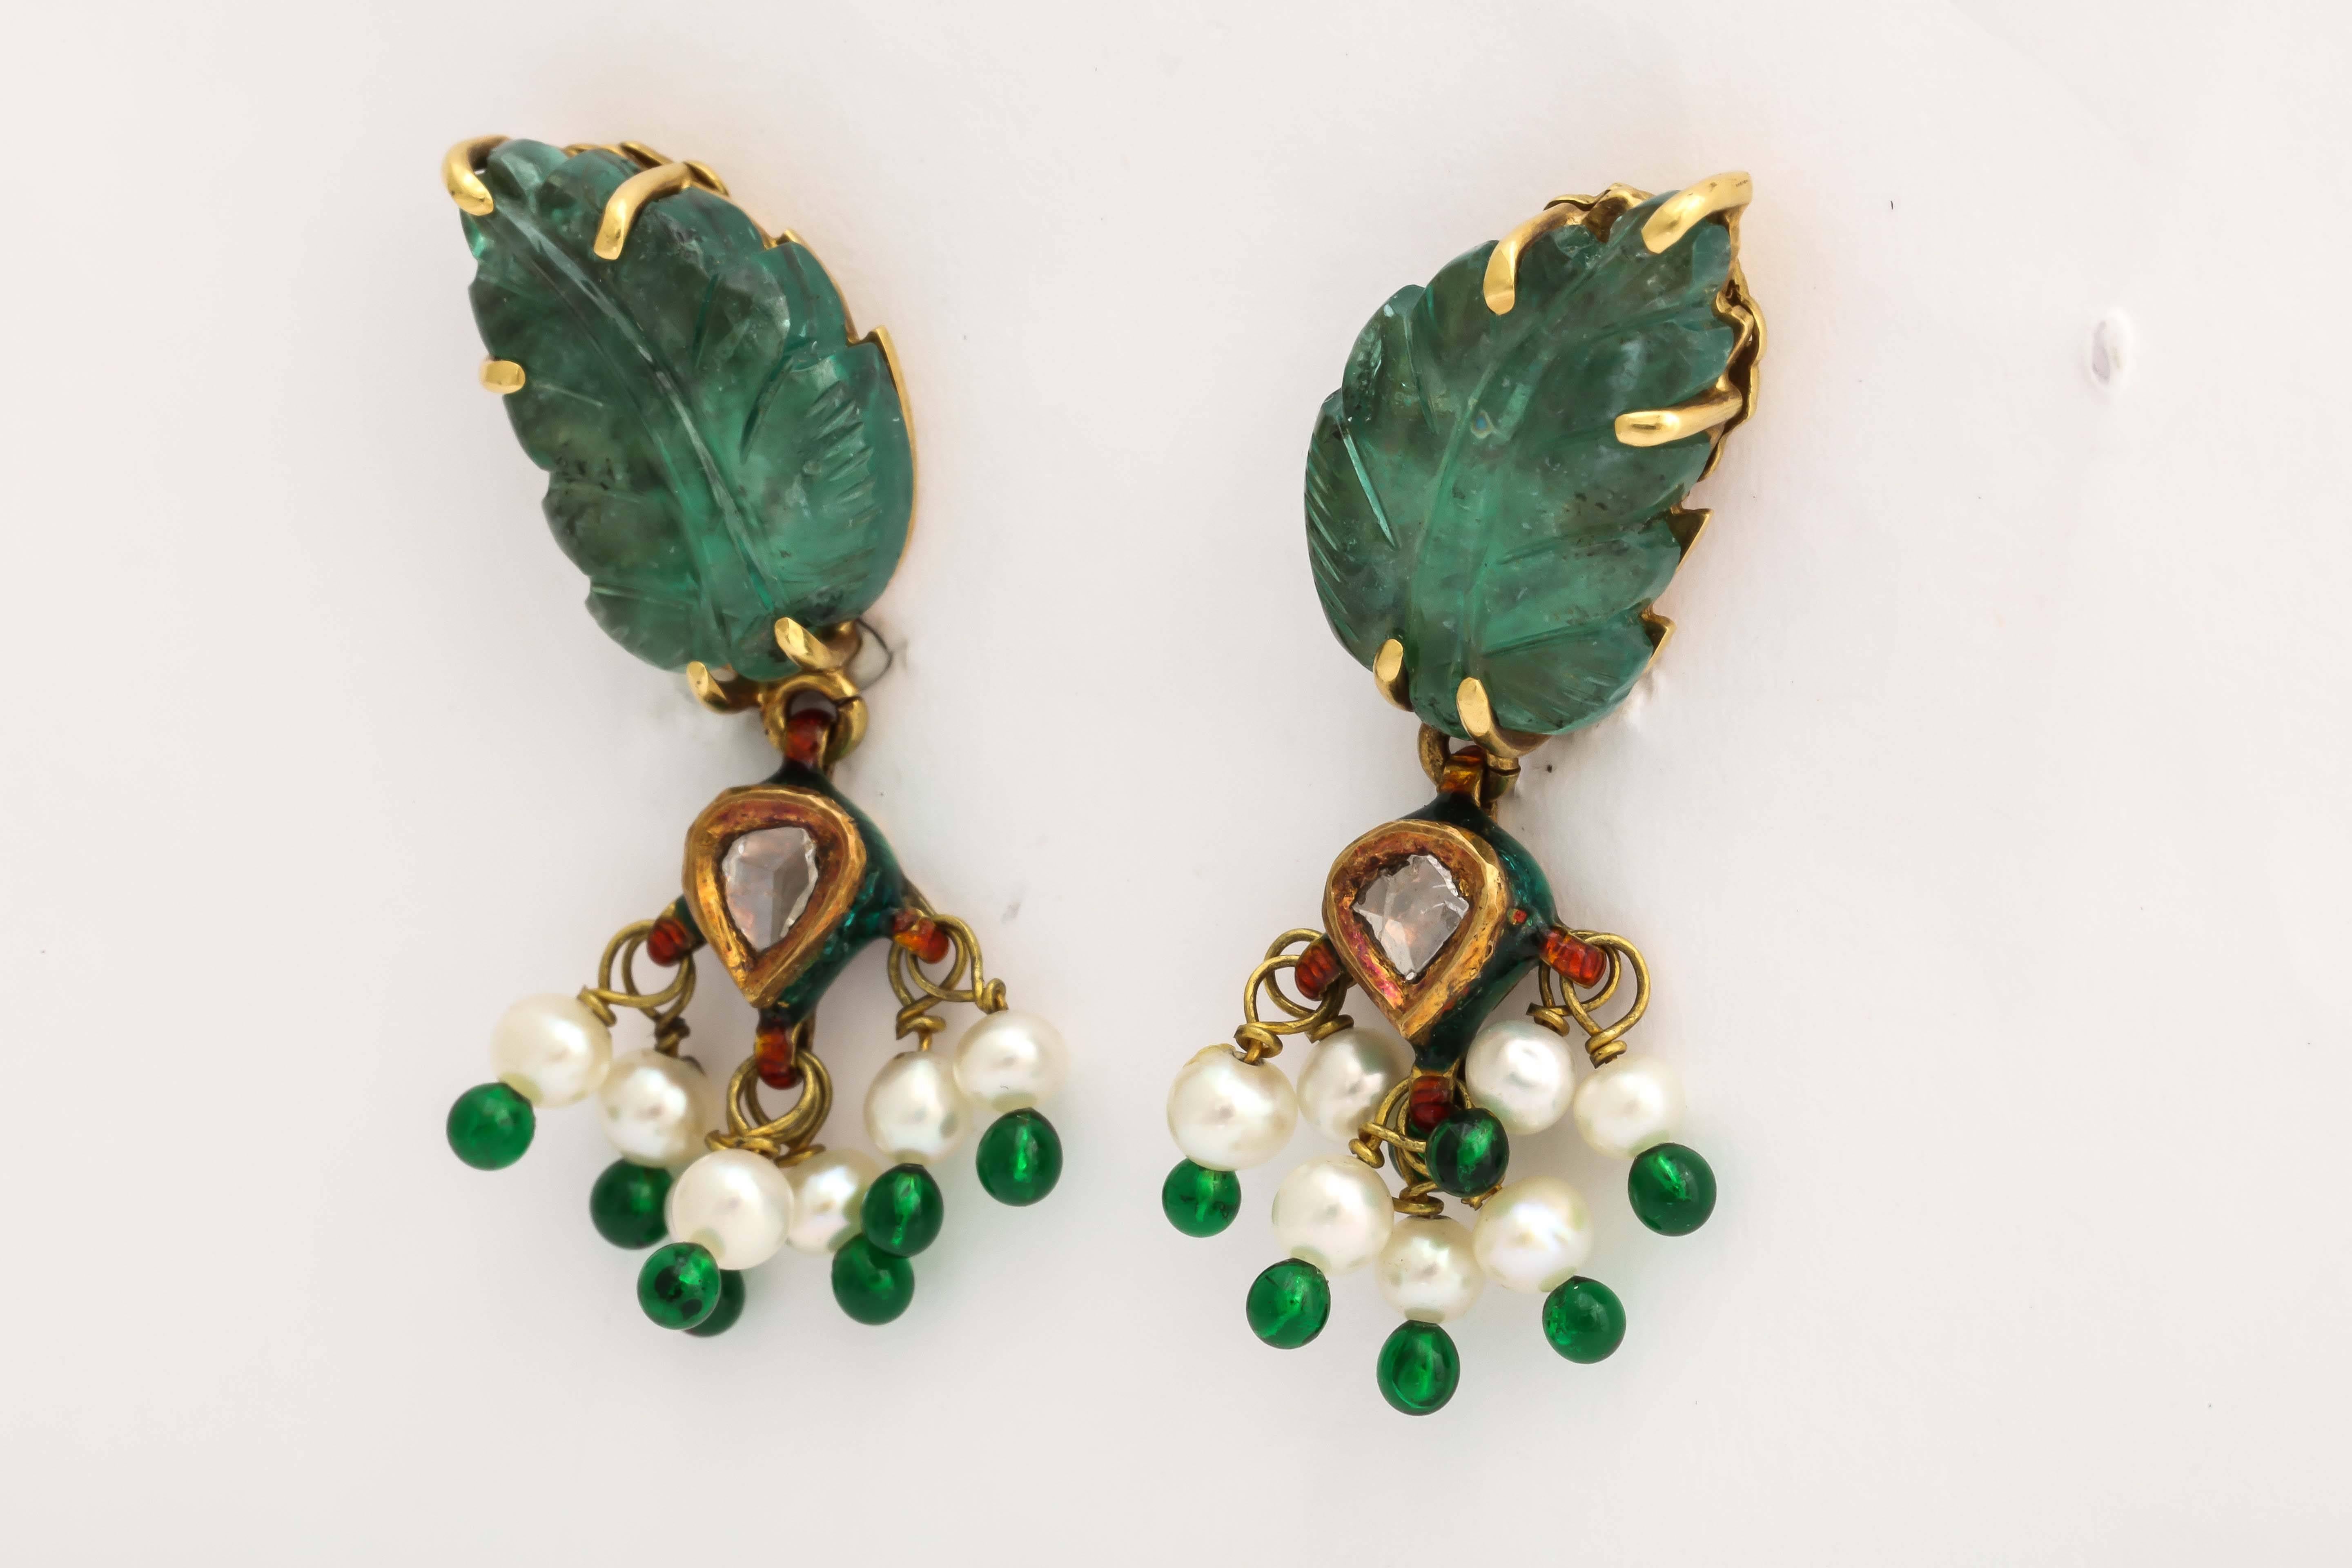 These beautiful emeralds were carved into leaf shapes by the skilled craftsmen in India. They are custom set in 18 kt yellow gold with an Indian polki diamond in the center and pearls tipped enamel clusters dangling from the emerald settings.
The